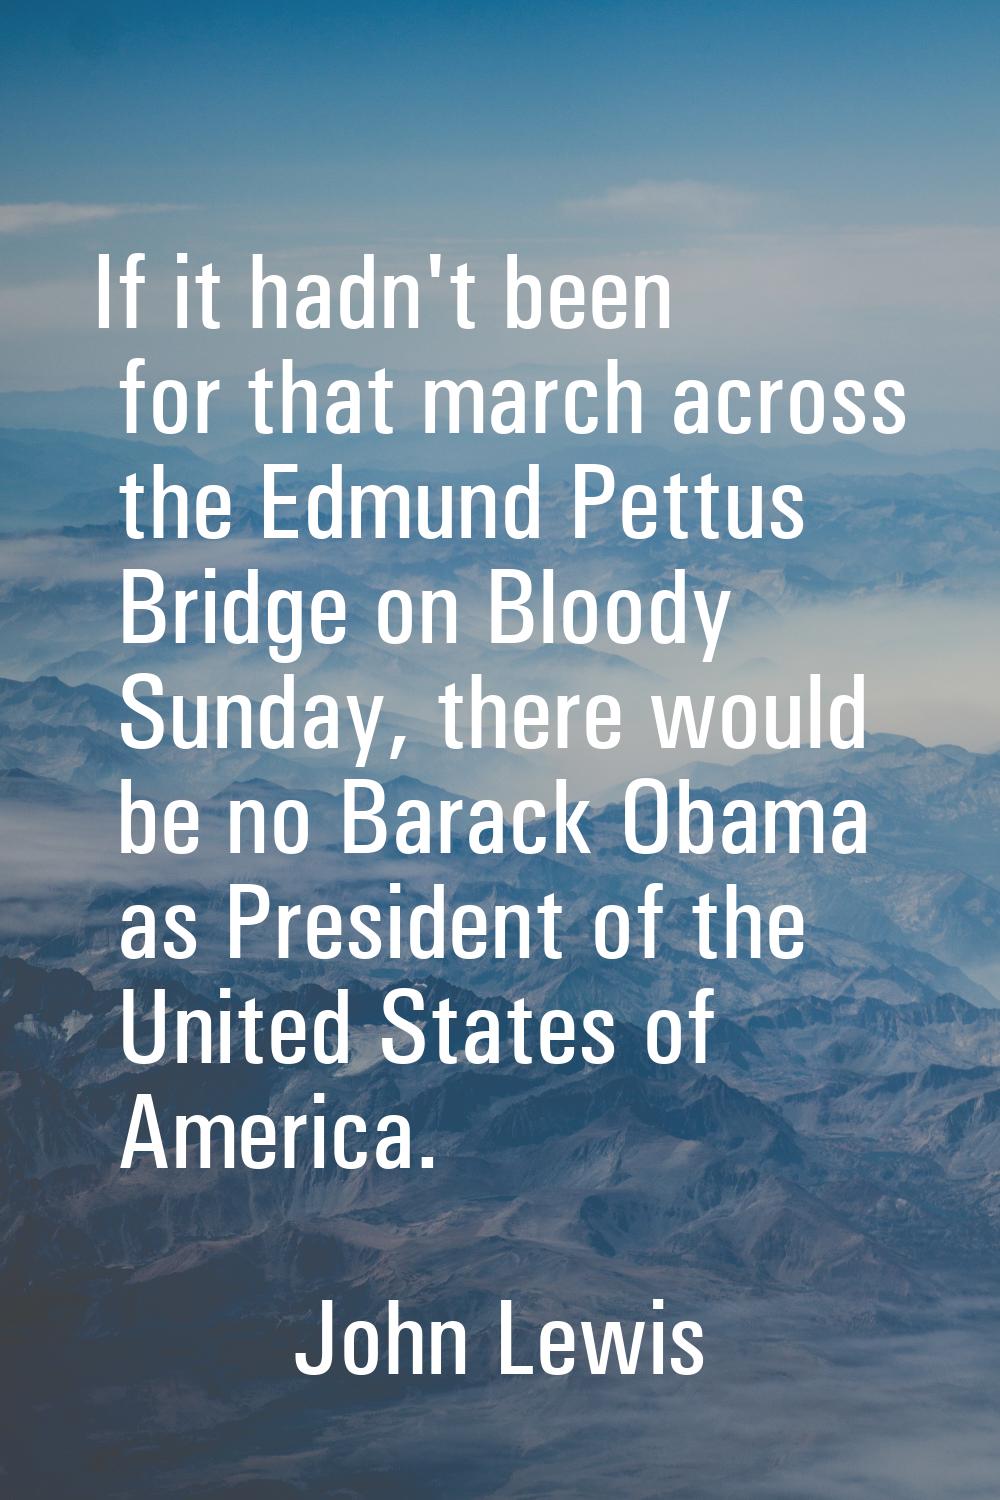 If it hadn't been for that march across the Edmund Pettus Bridge on Bloody Sunday, there would be n